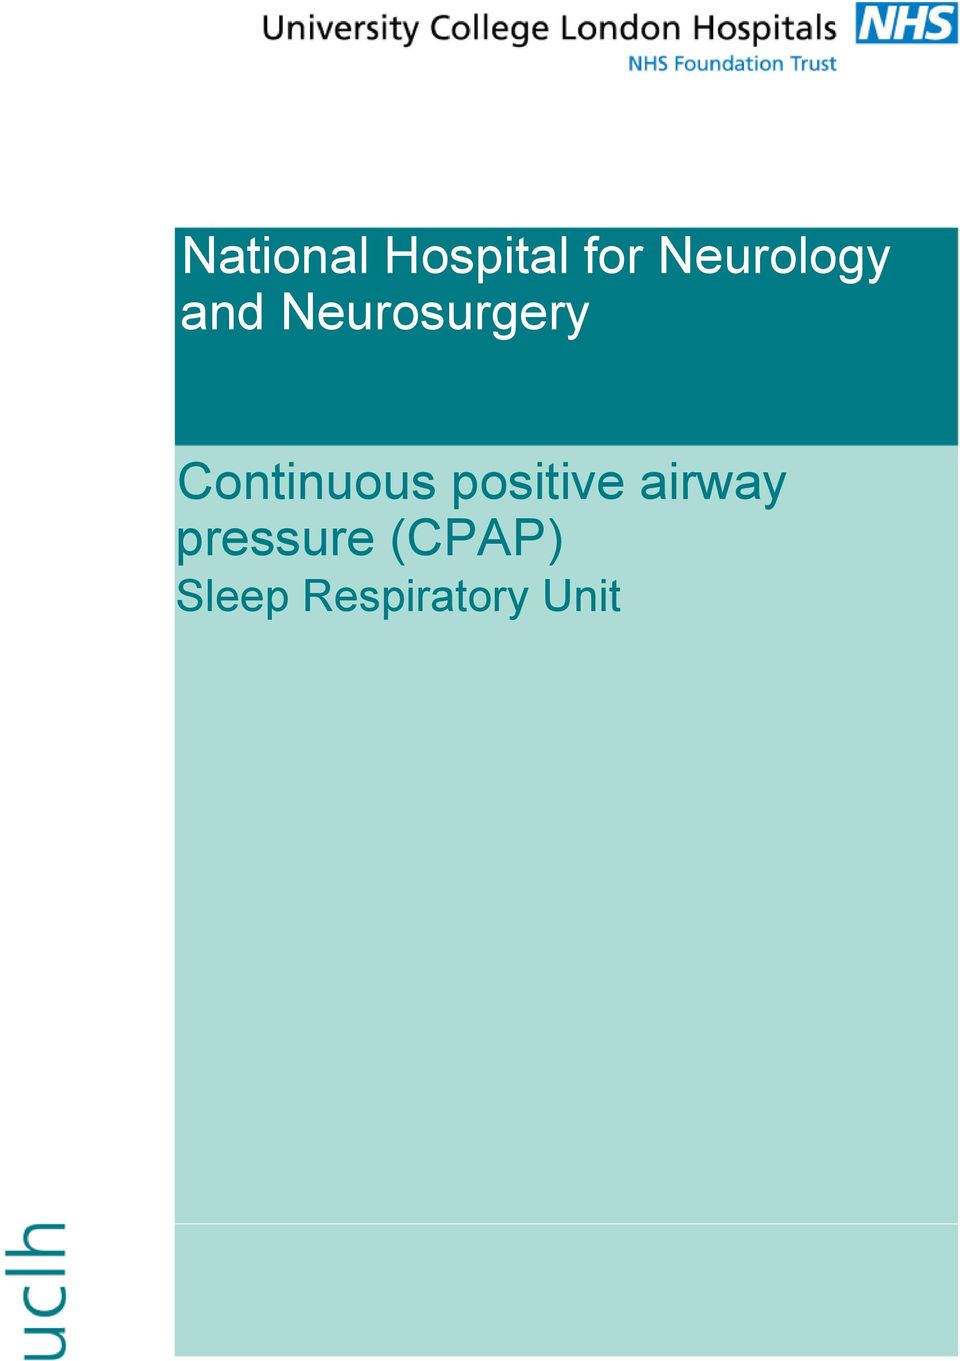 Continuous positive airway